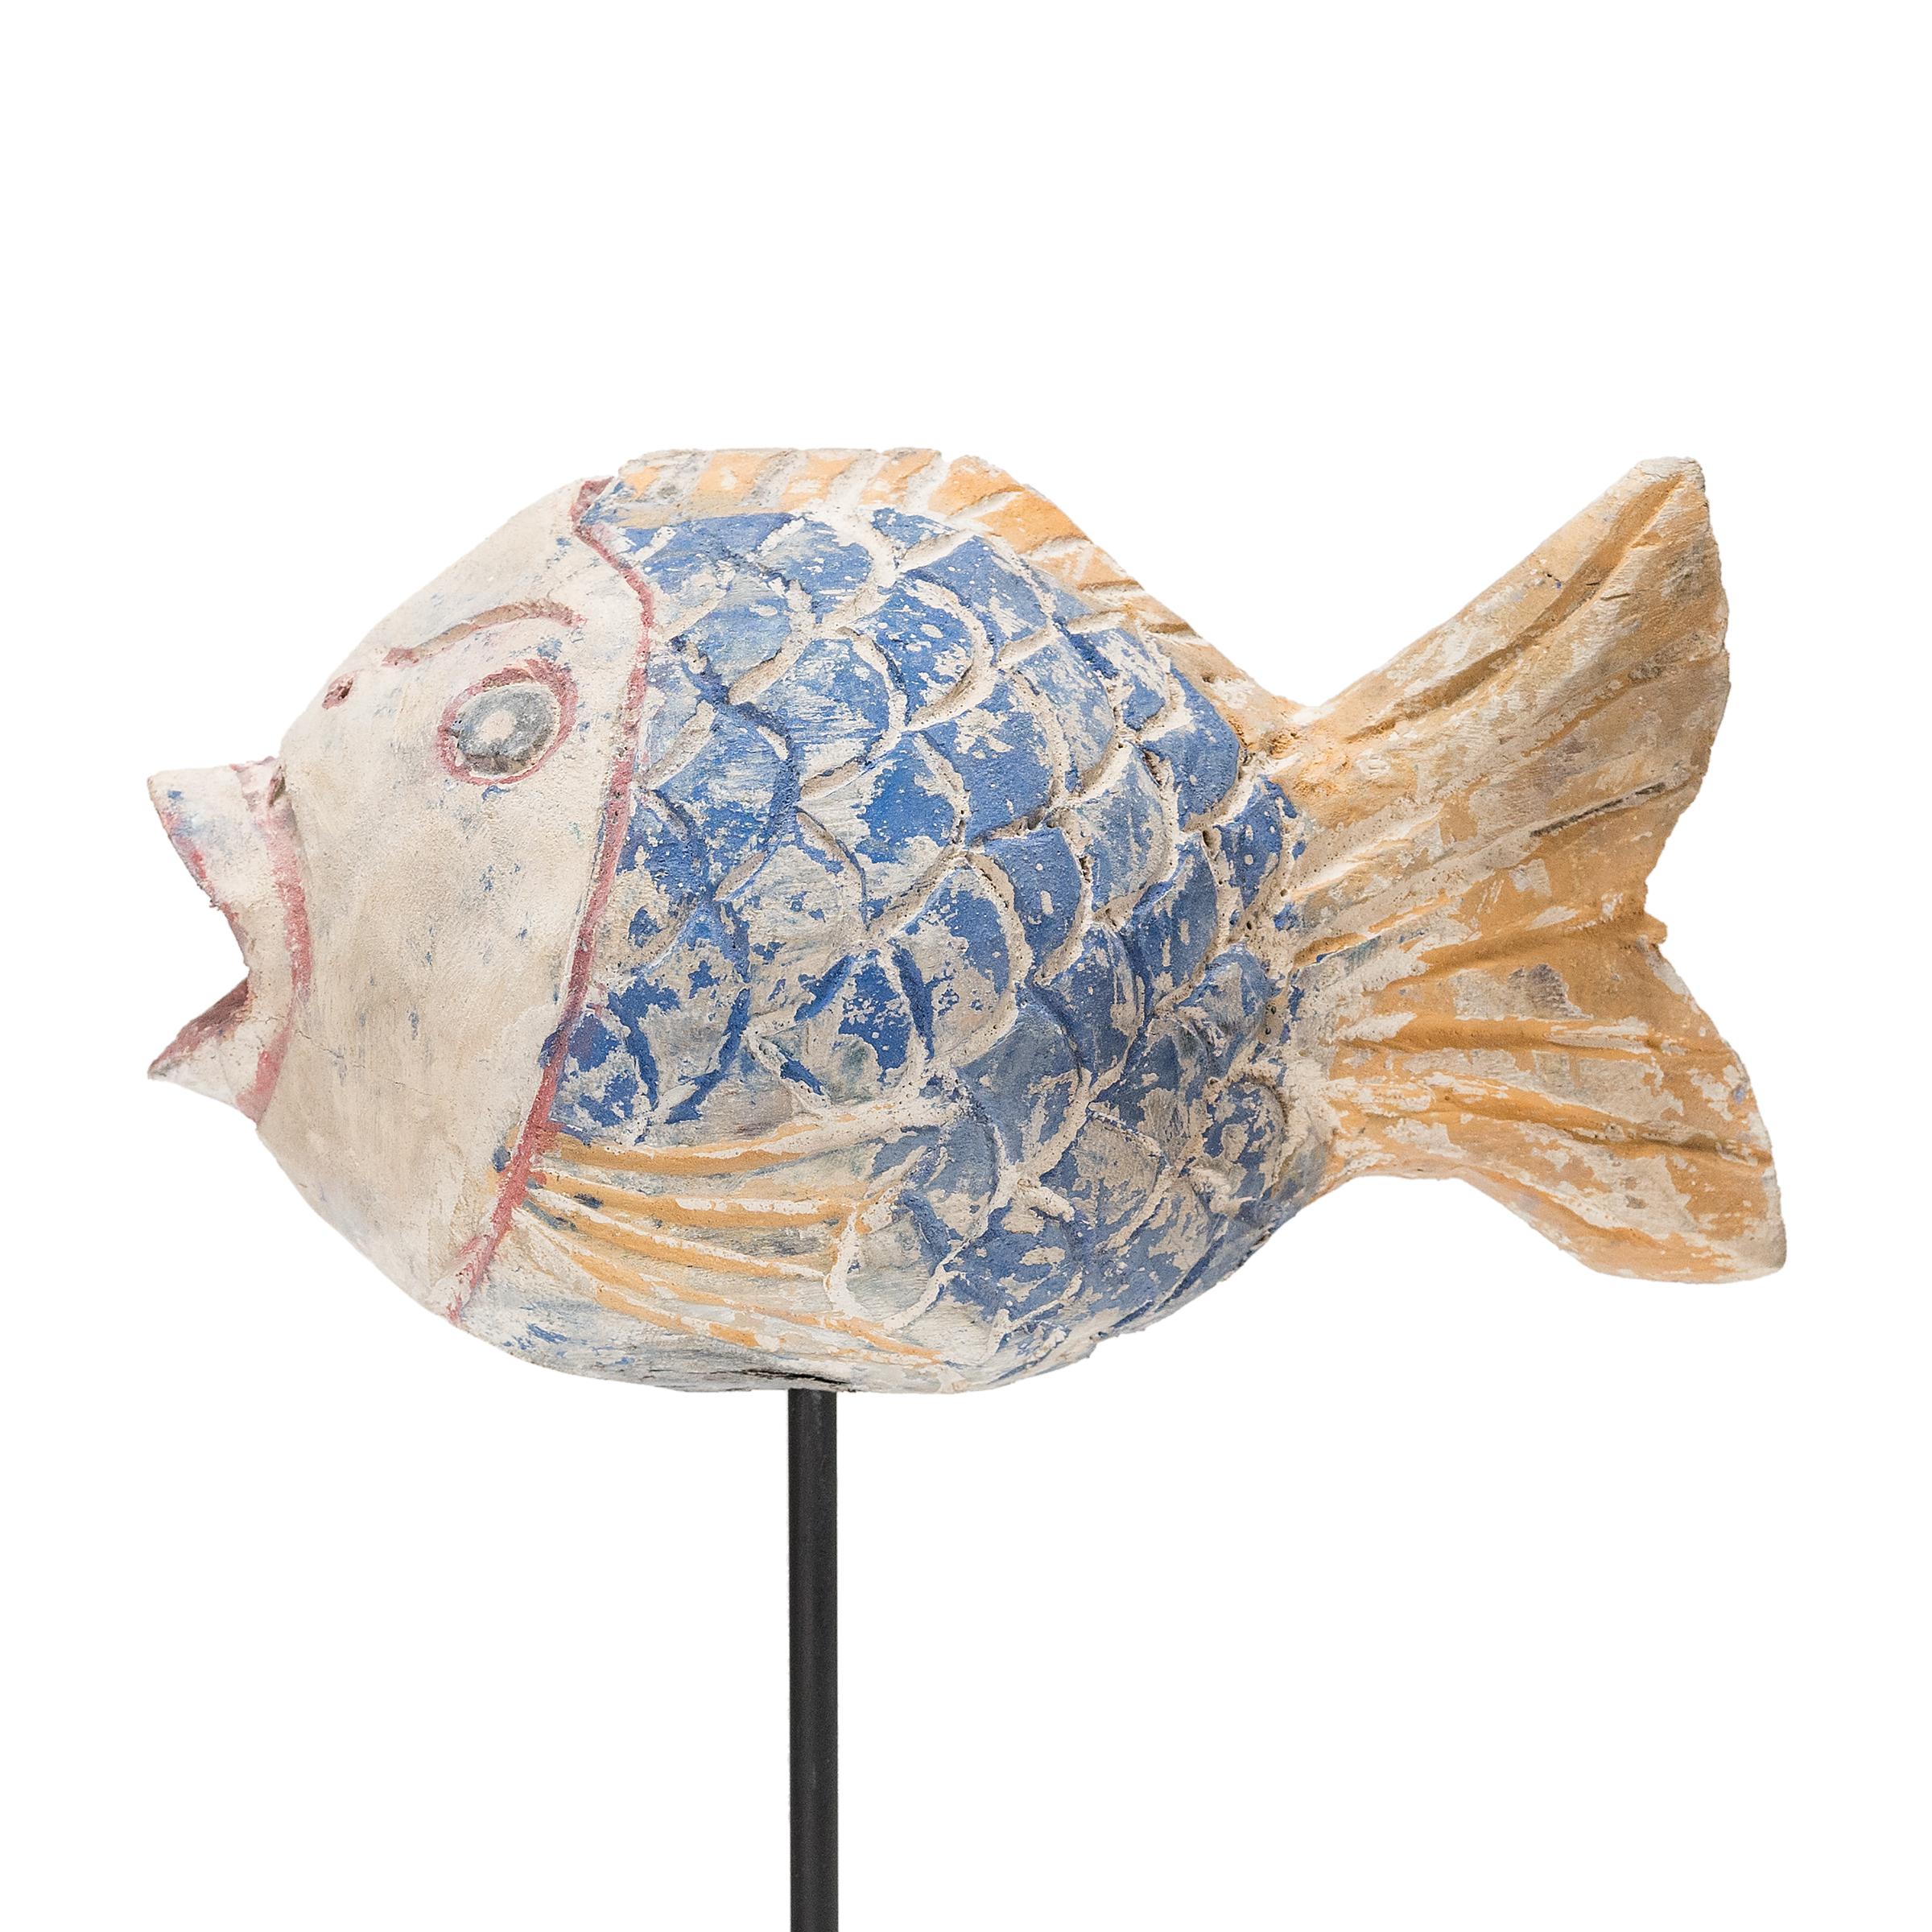 Hand-crafted from reclaimed wood, this artist-made koi is a traditional symbol of harmony and wealth. For Buddhists, such a fish represents a freedom from all restraints. The scales and fins on the squat, rounded body are highlighted with blue,